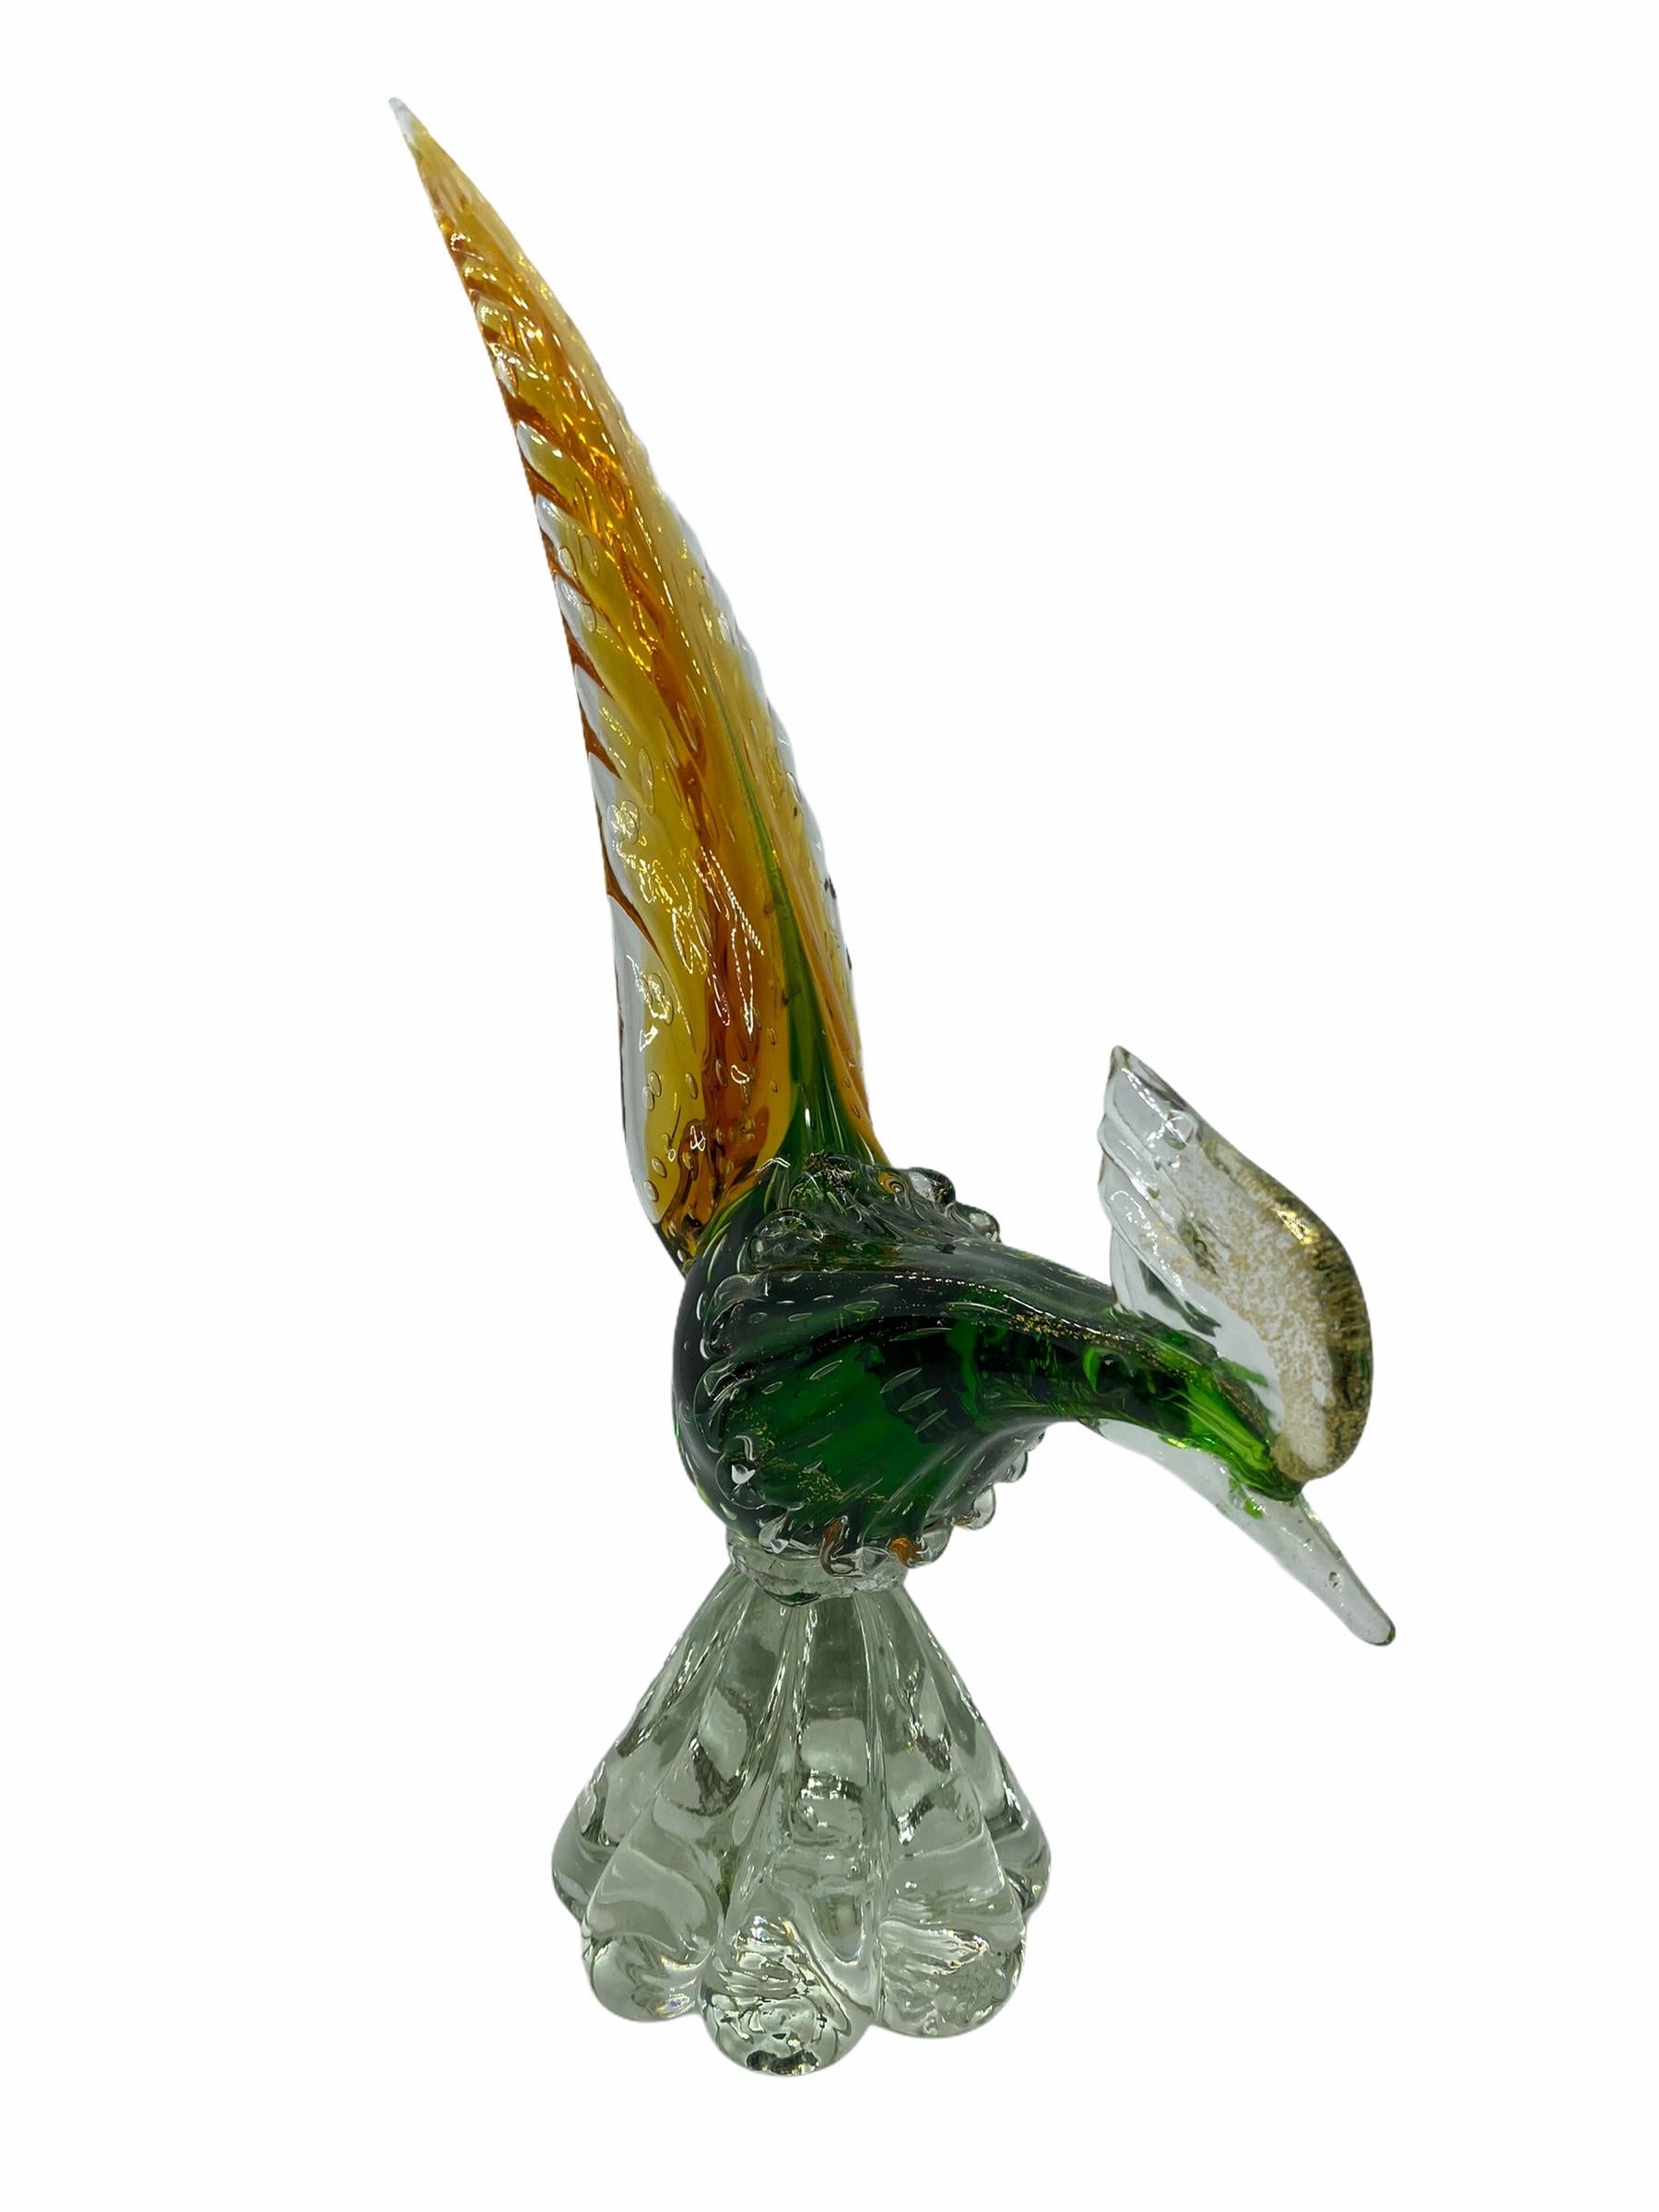 A Venetian sculptural fish figurine in hand blown glass, produced on the isle of Murano, circa 1950s. A nice piece of art for any room.